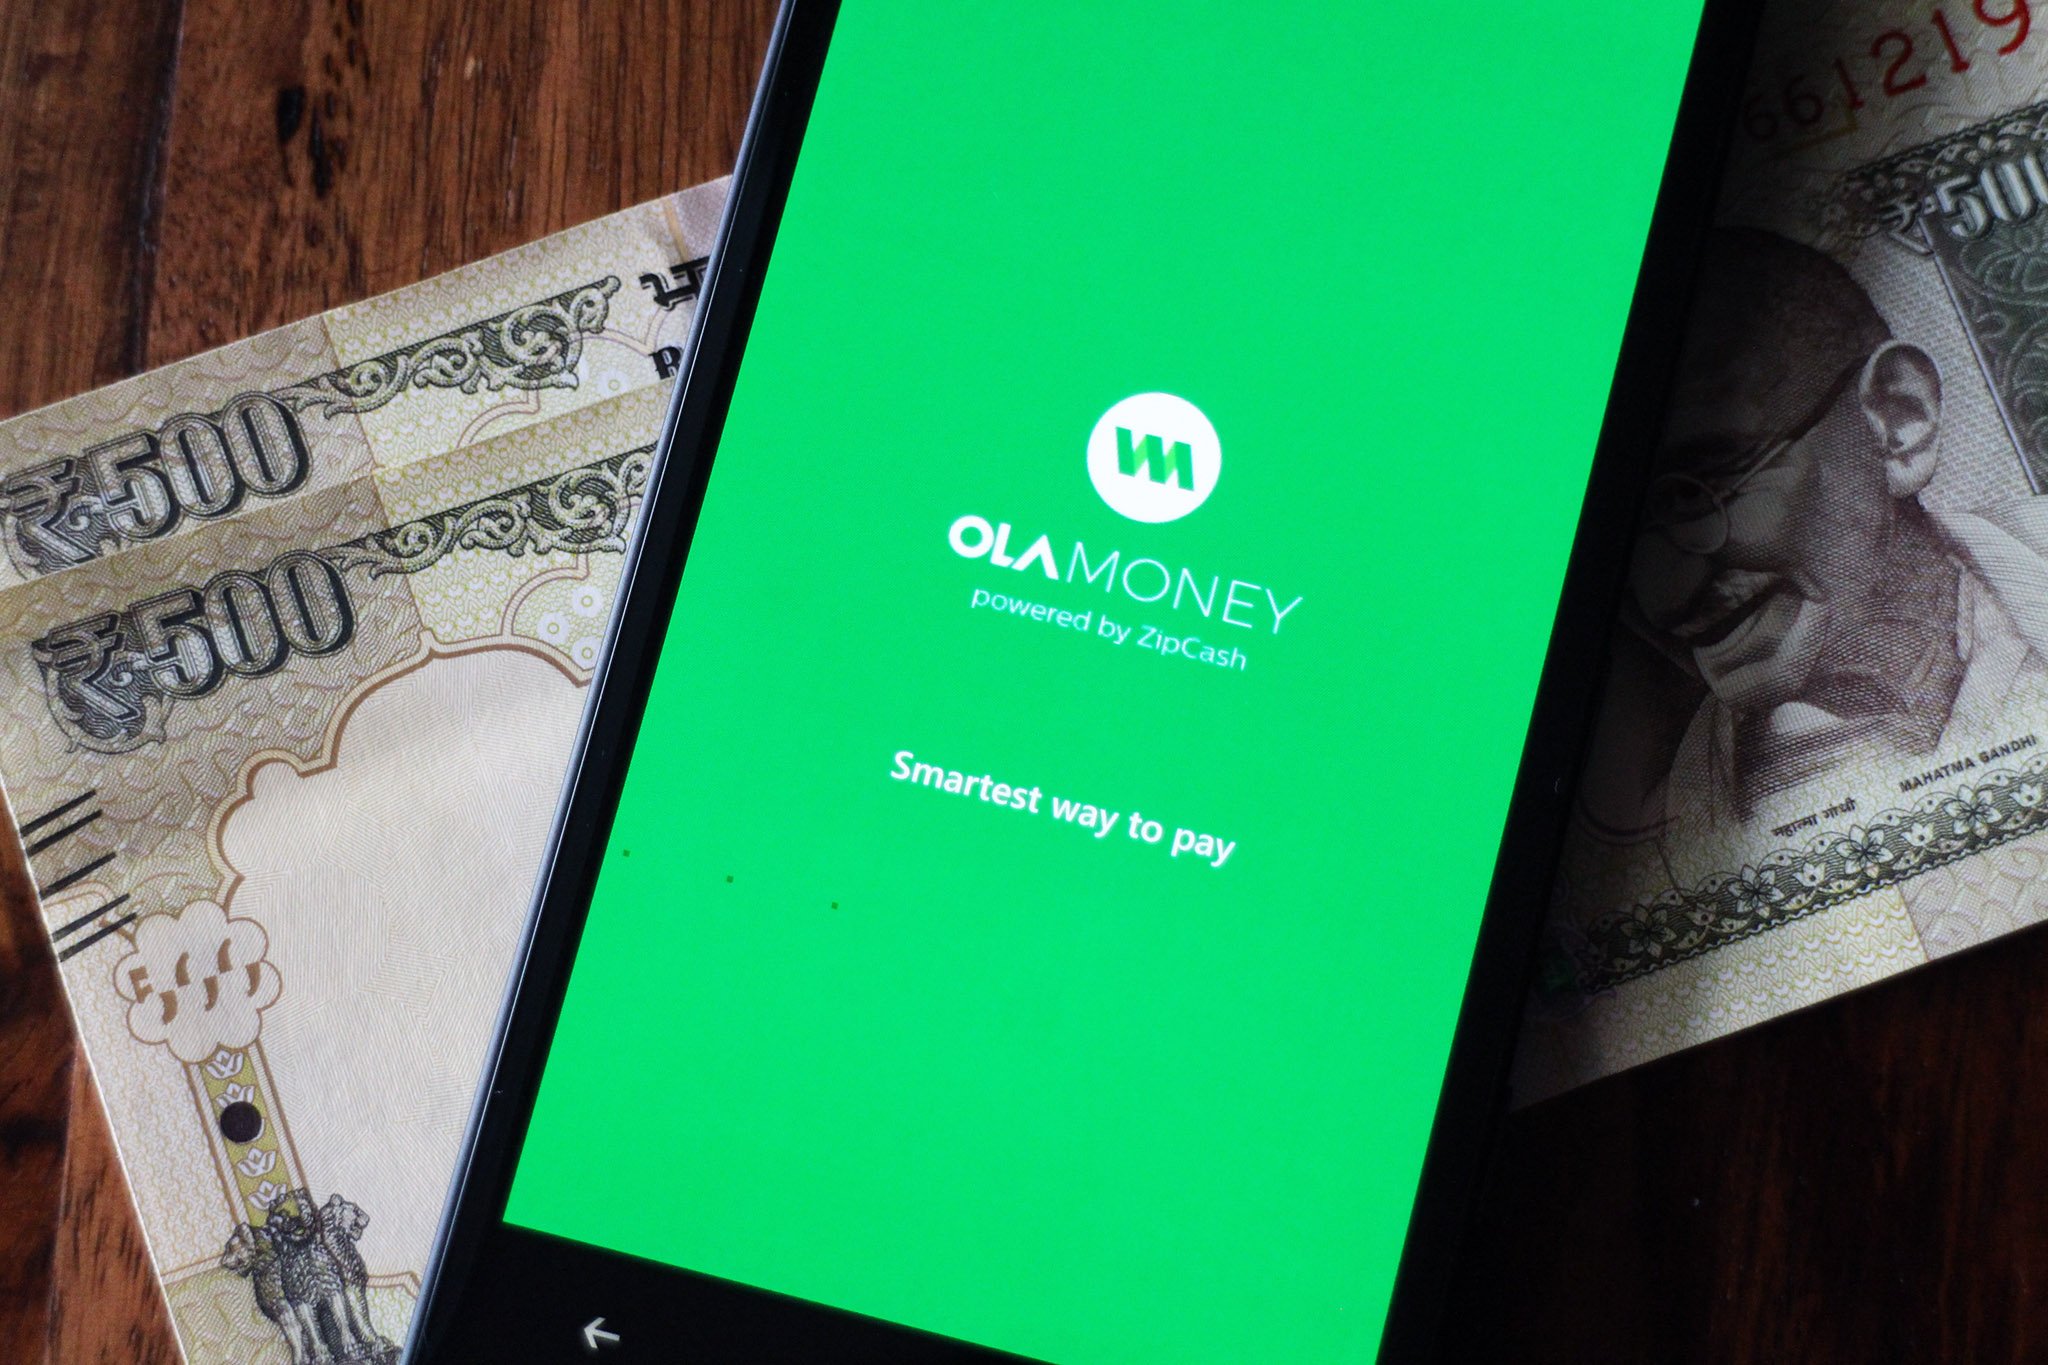 Ola Money digital wallet makes its way to Windows 10 Mobile | Windows Central